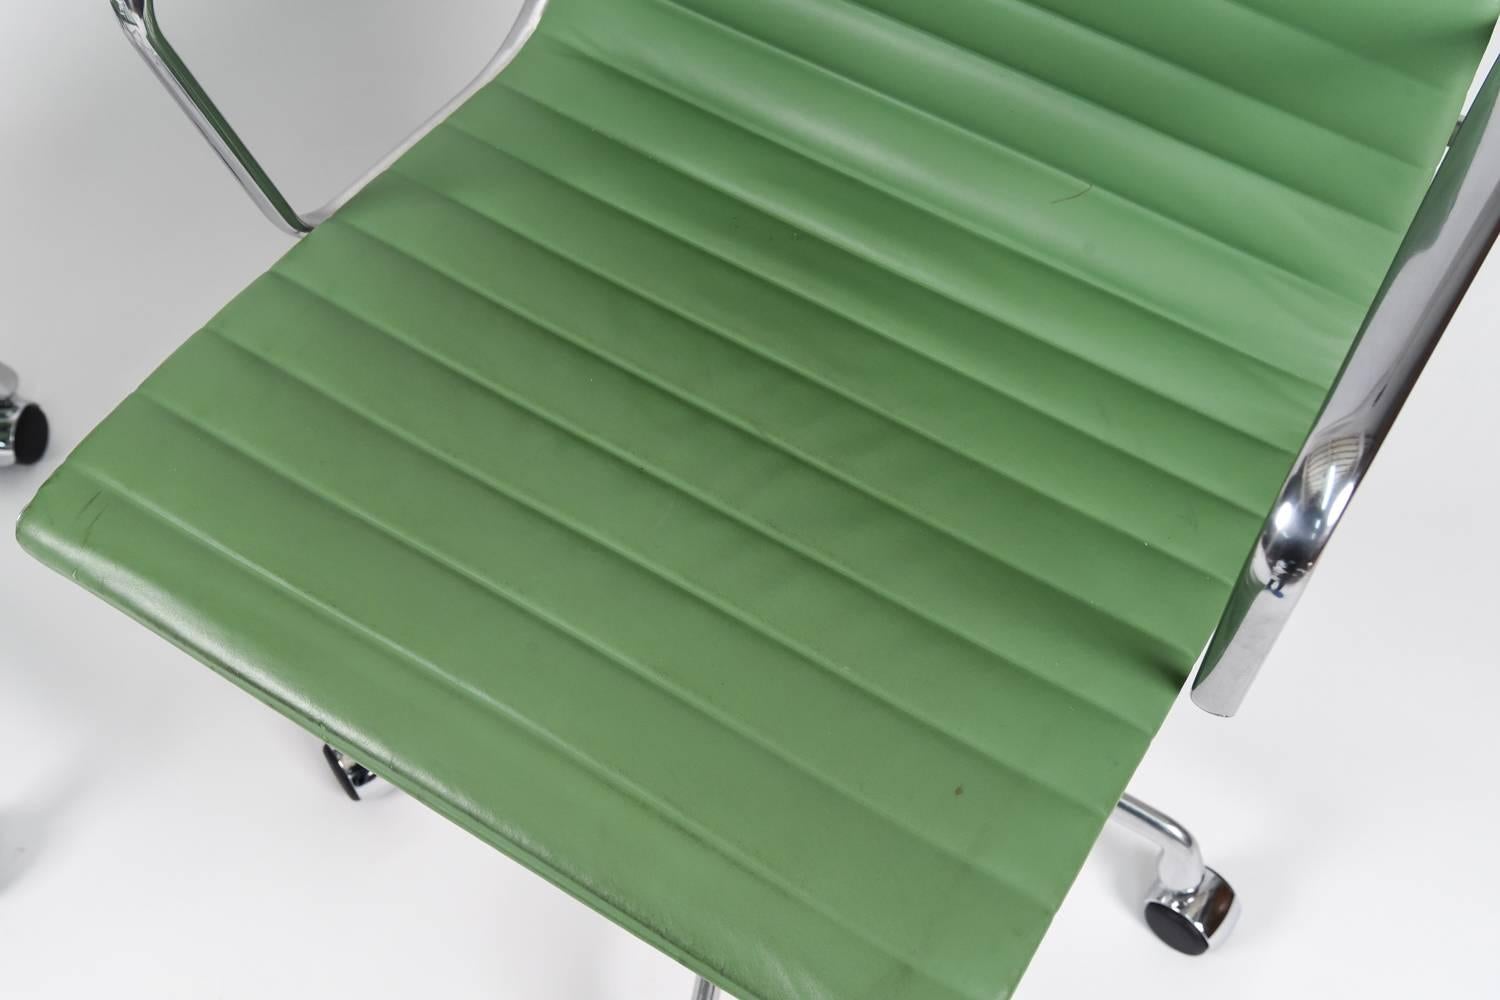 Eames Aluminum Group chairs were developed in 1958 by Charles and Ray Eames for a home designed by Eero Saarinen and Alexander Girard. These are a stunning pair in rare apple green leather produced by Herman Miller in the late 20th century these two